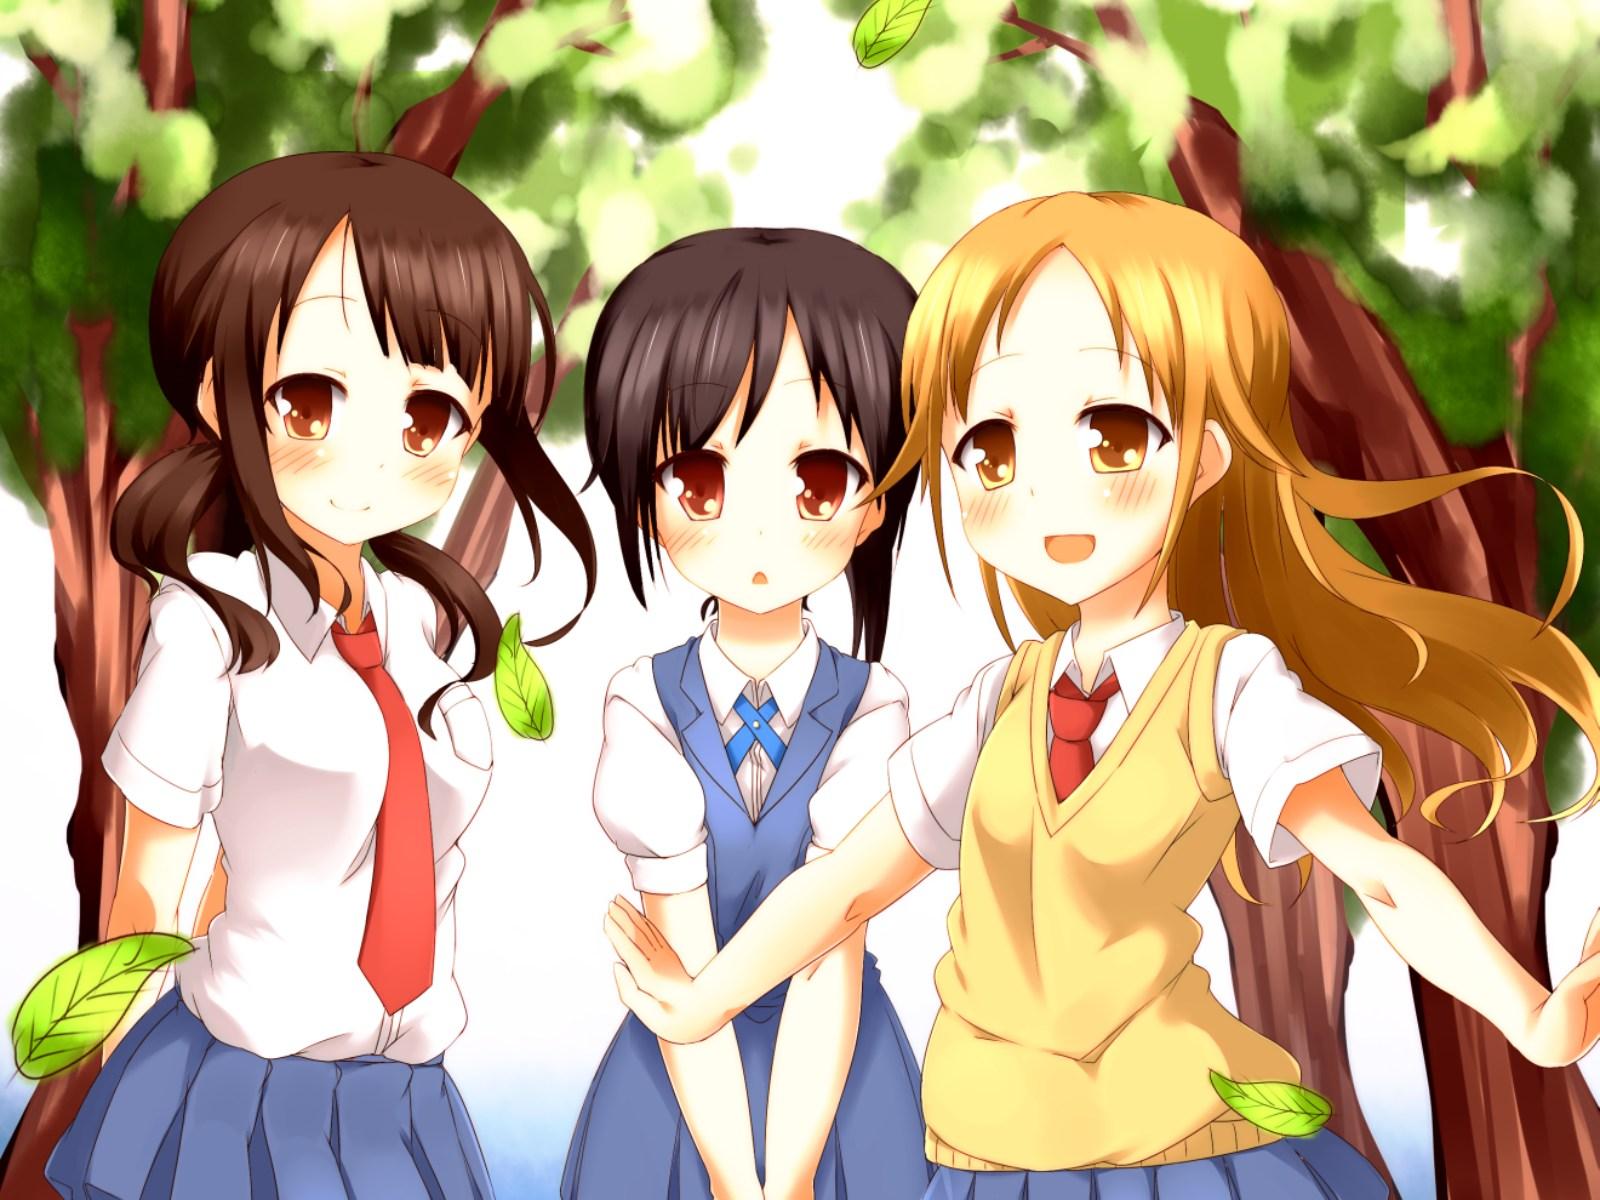 Three Anime Girl Friends Wallpapers - Wallpaper Cave